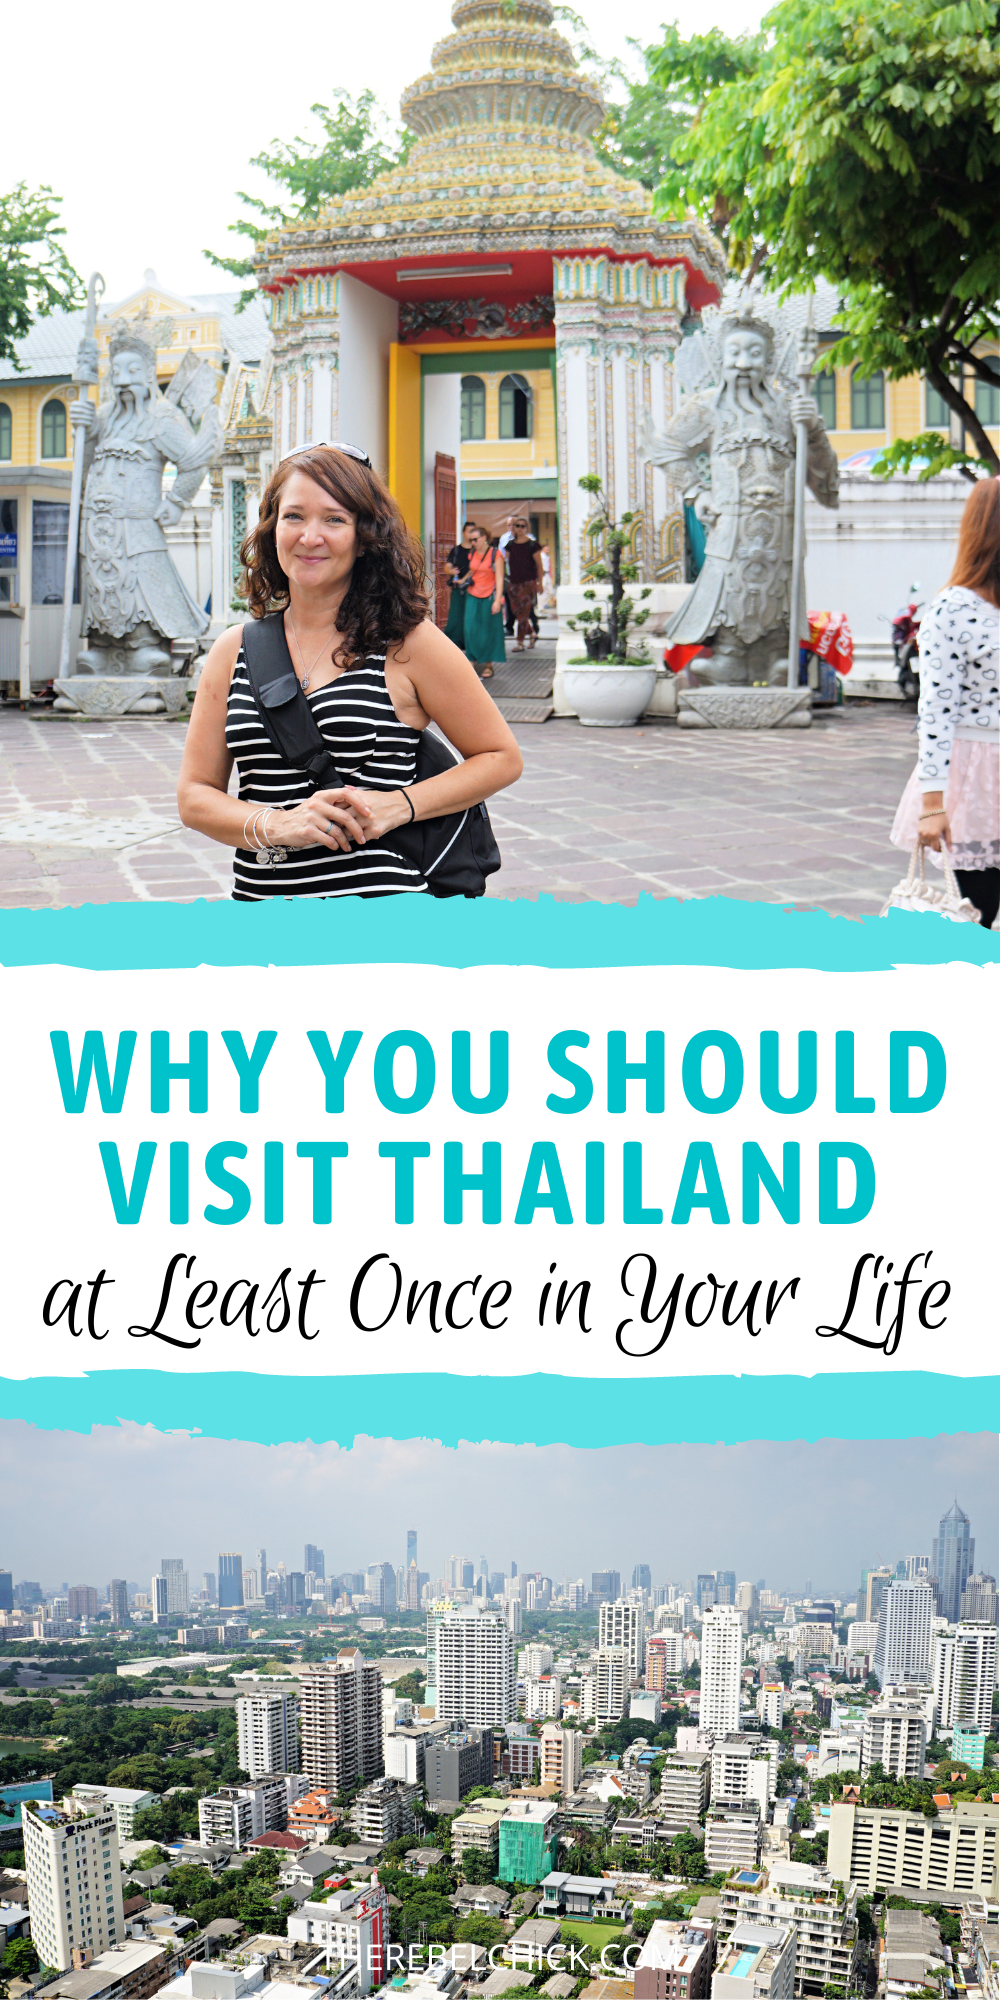 Why You Should Visit Thailand at Least Once in Your Life